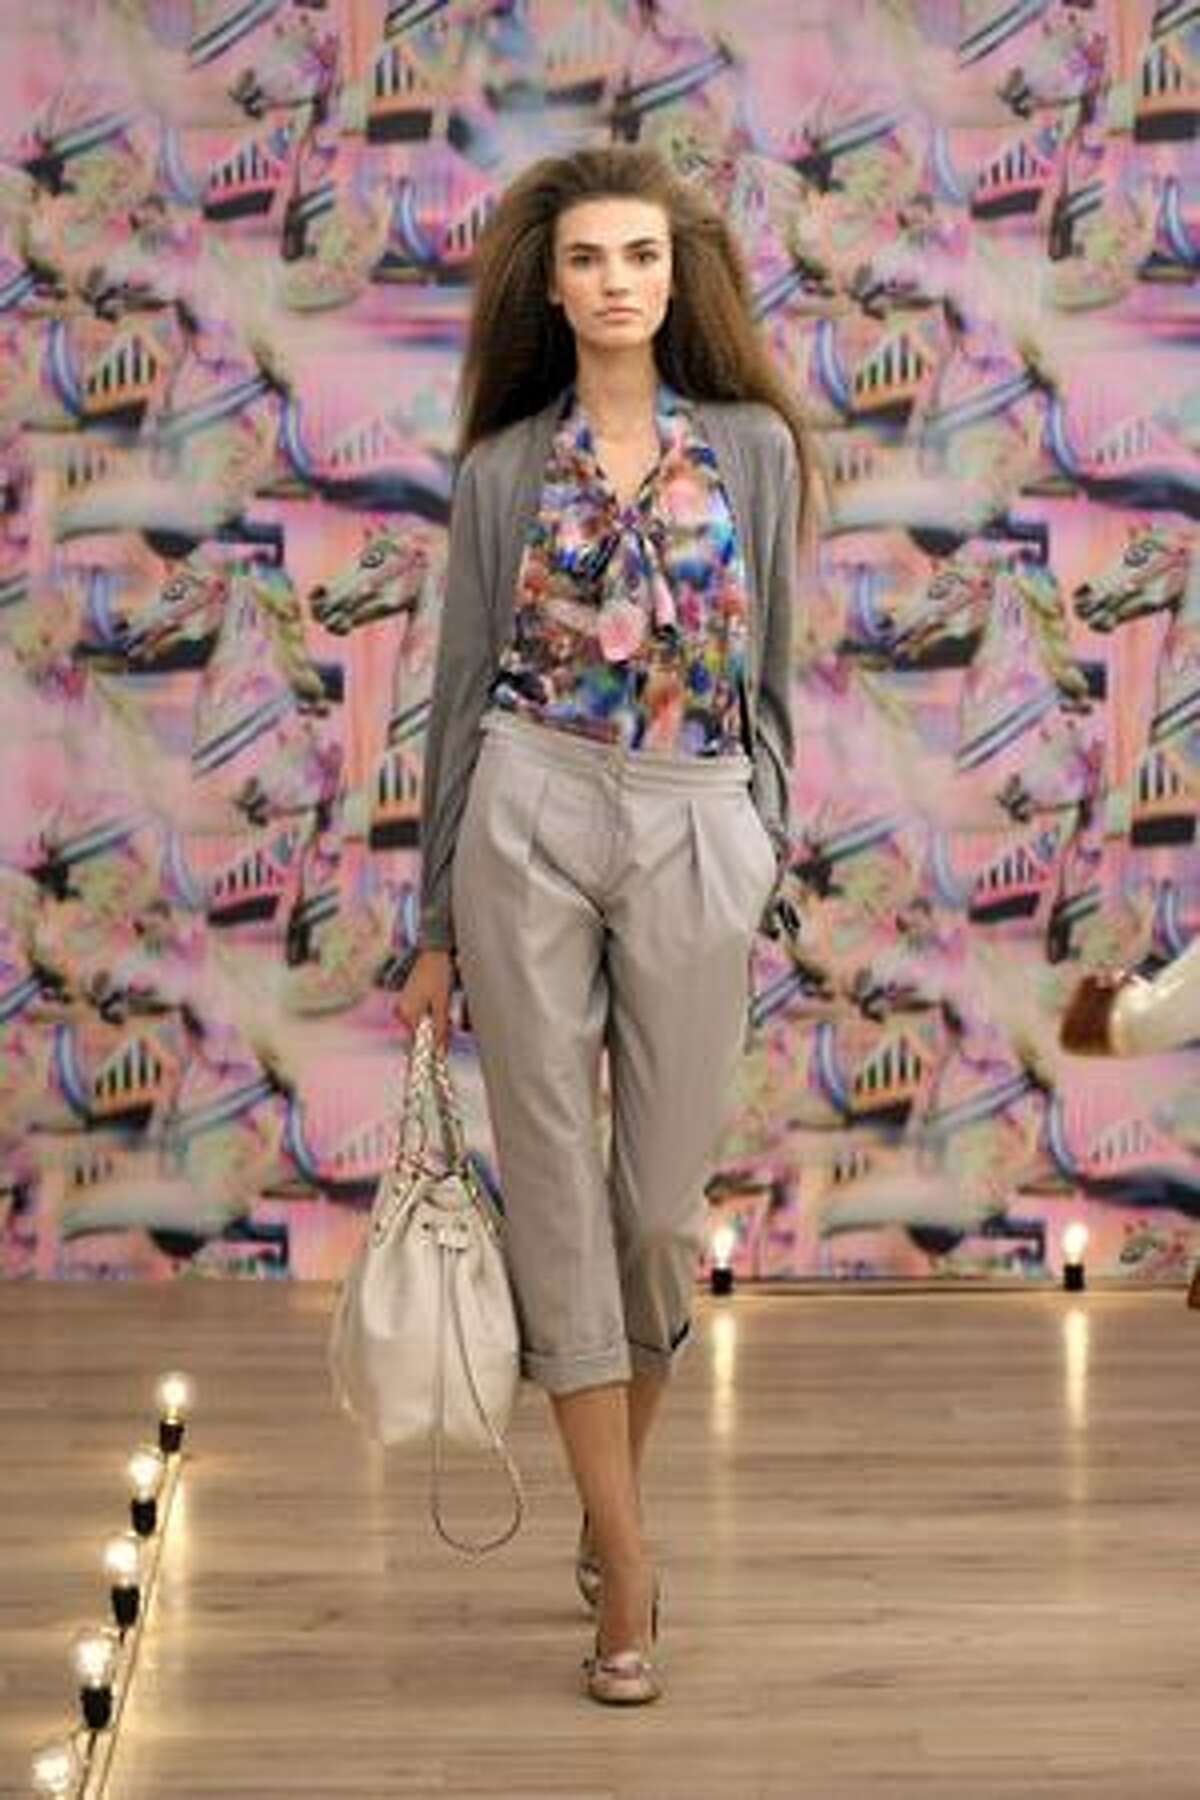 A model walks at the Mulberry presentation at Soho House Library in New York on Tuesday, Sept. 15, 2009.